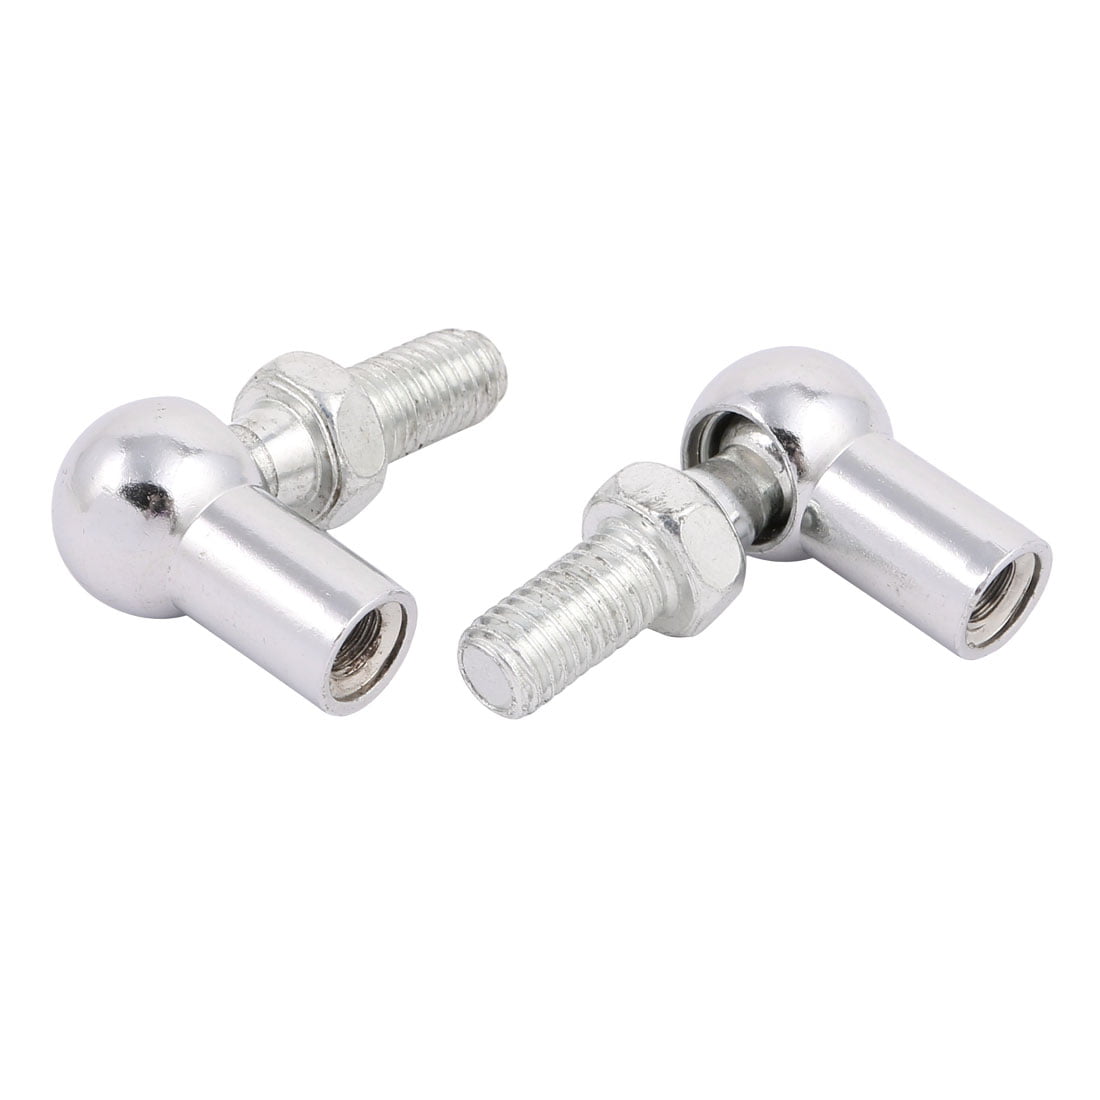 Details about   Thread Gas Spring Rod End Fitting Joint M8 /M6 Female Silver Tone Hole Dia 6/8mm 